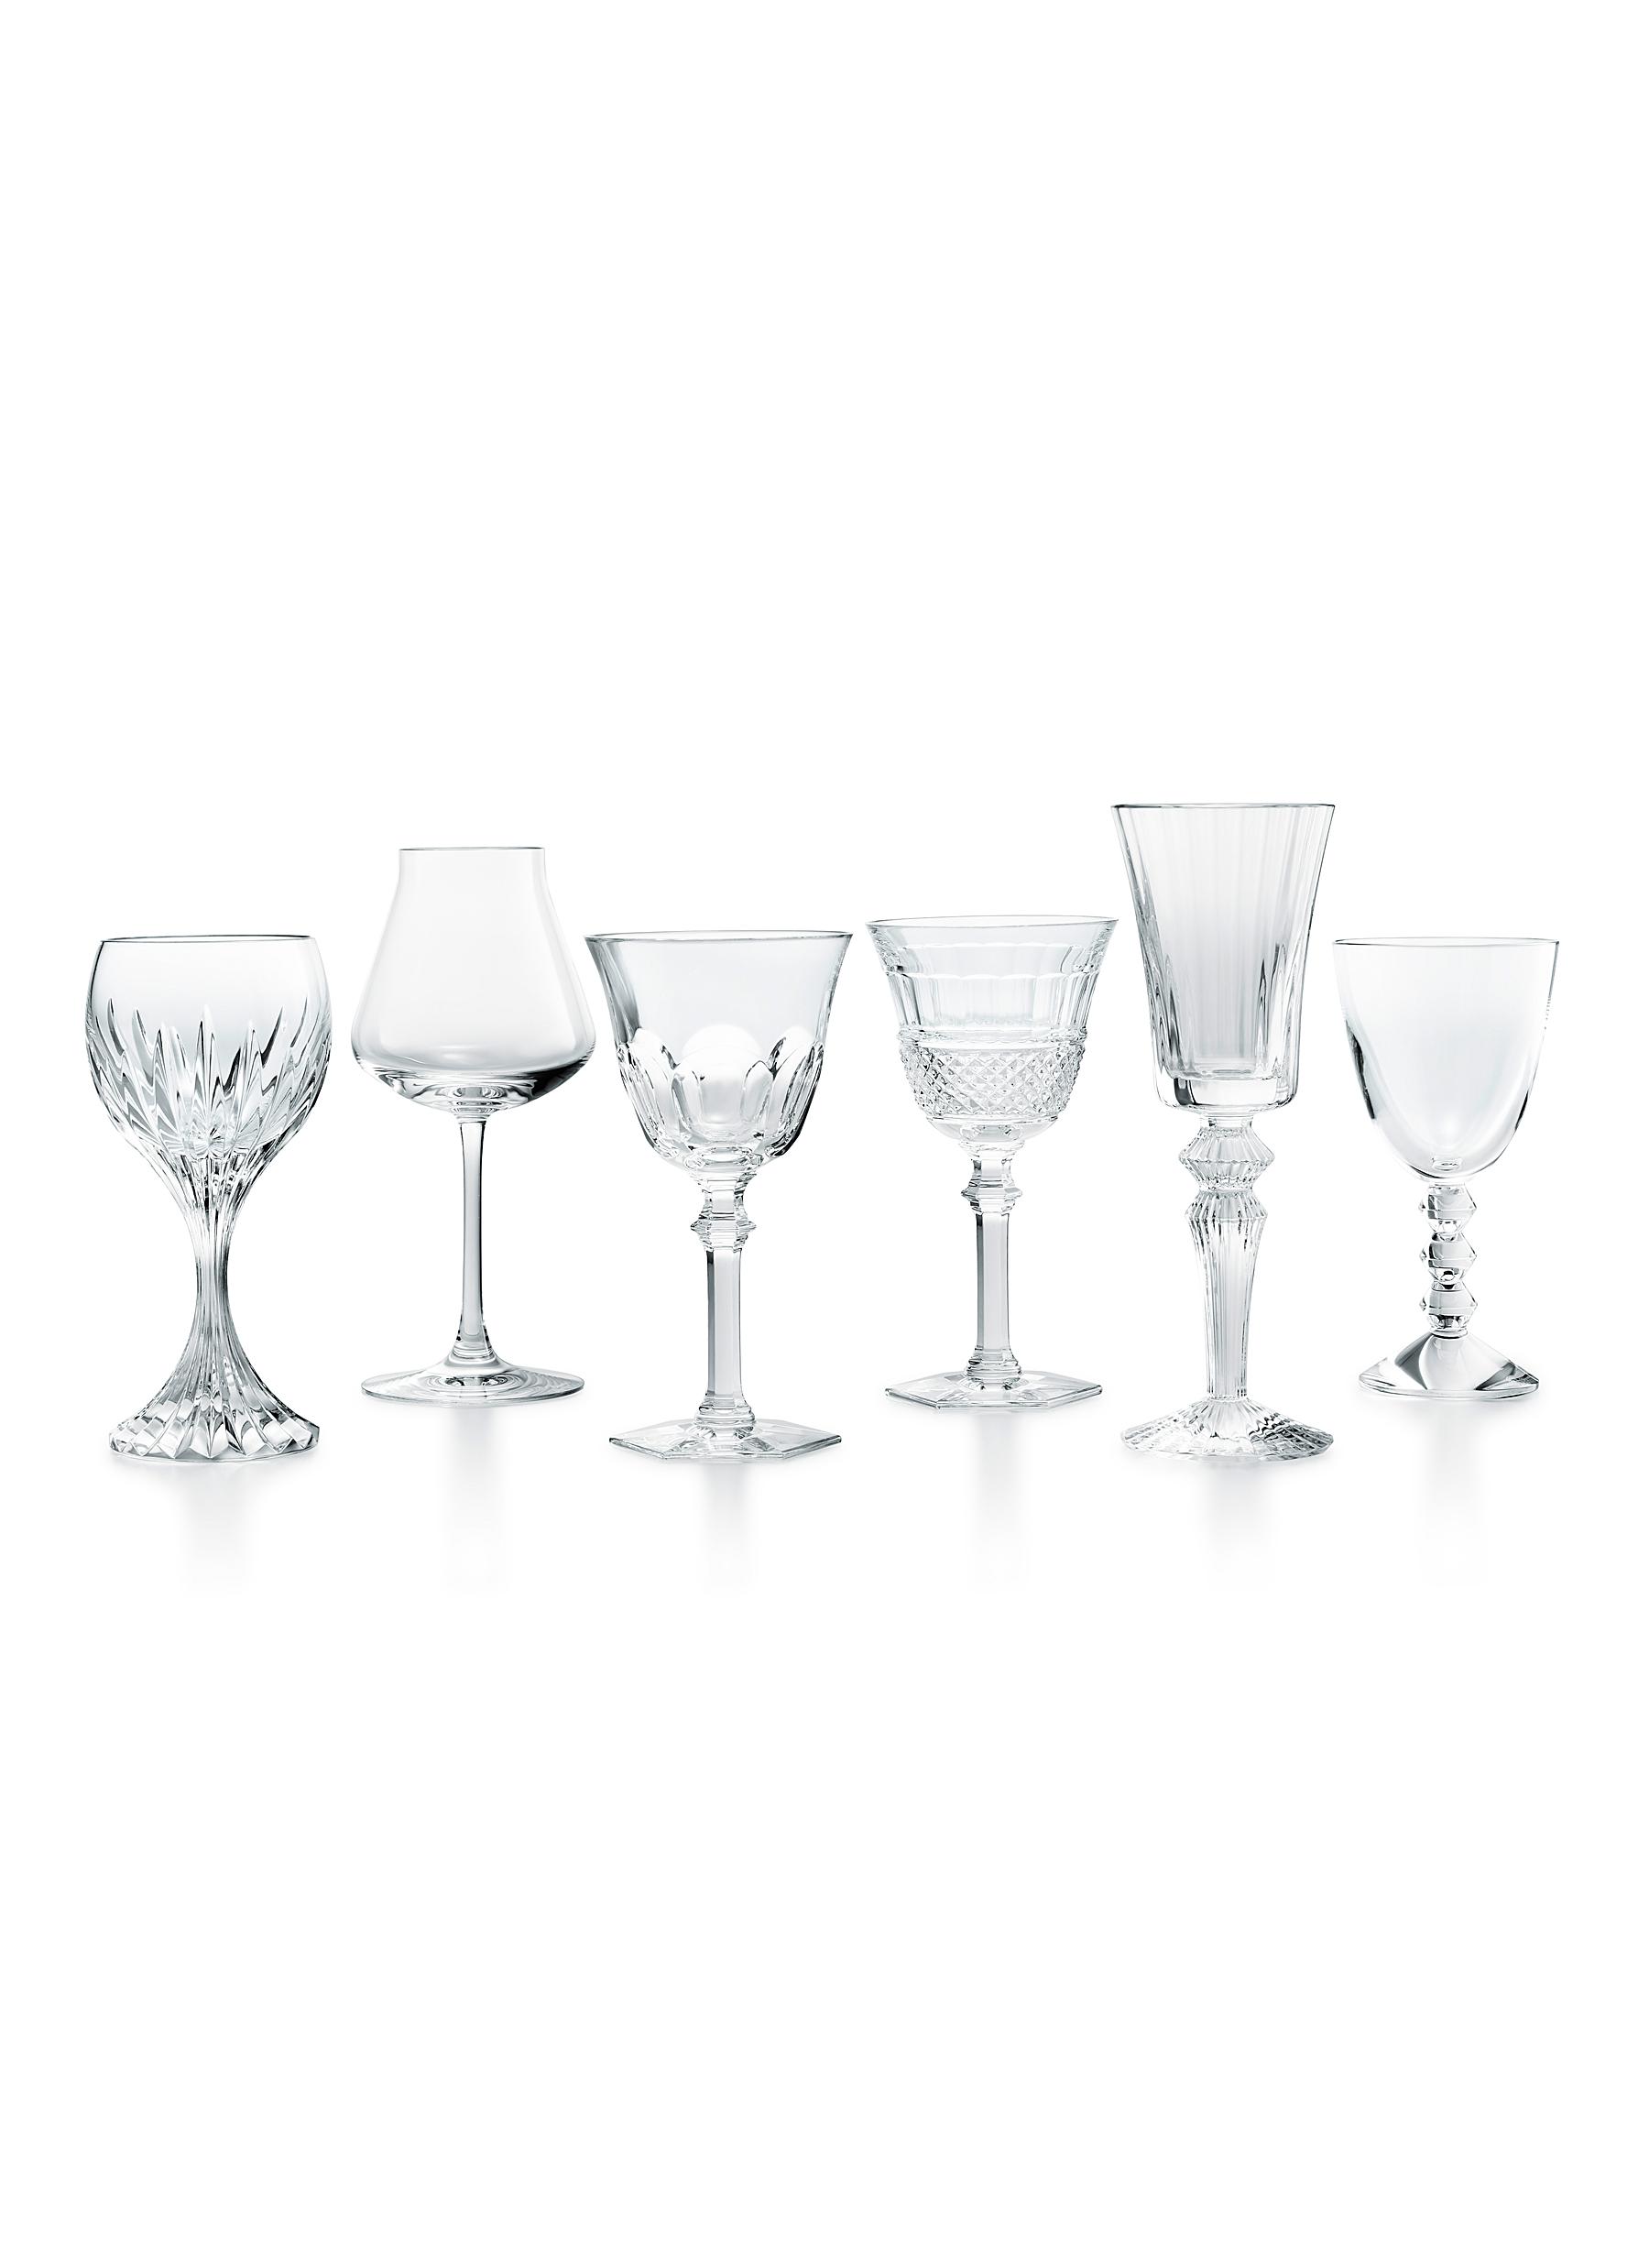 Wine Therapy Glasses Set